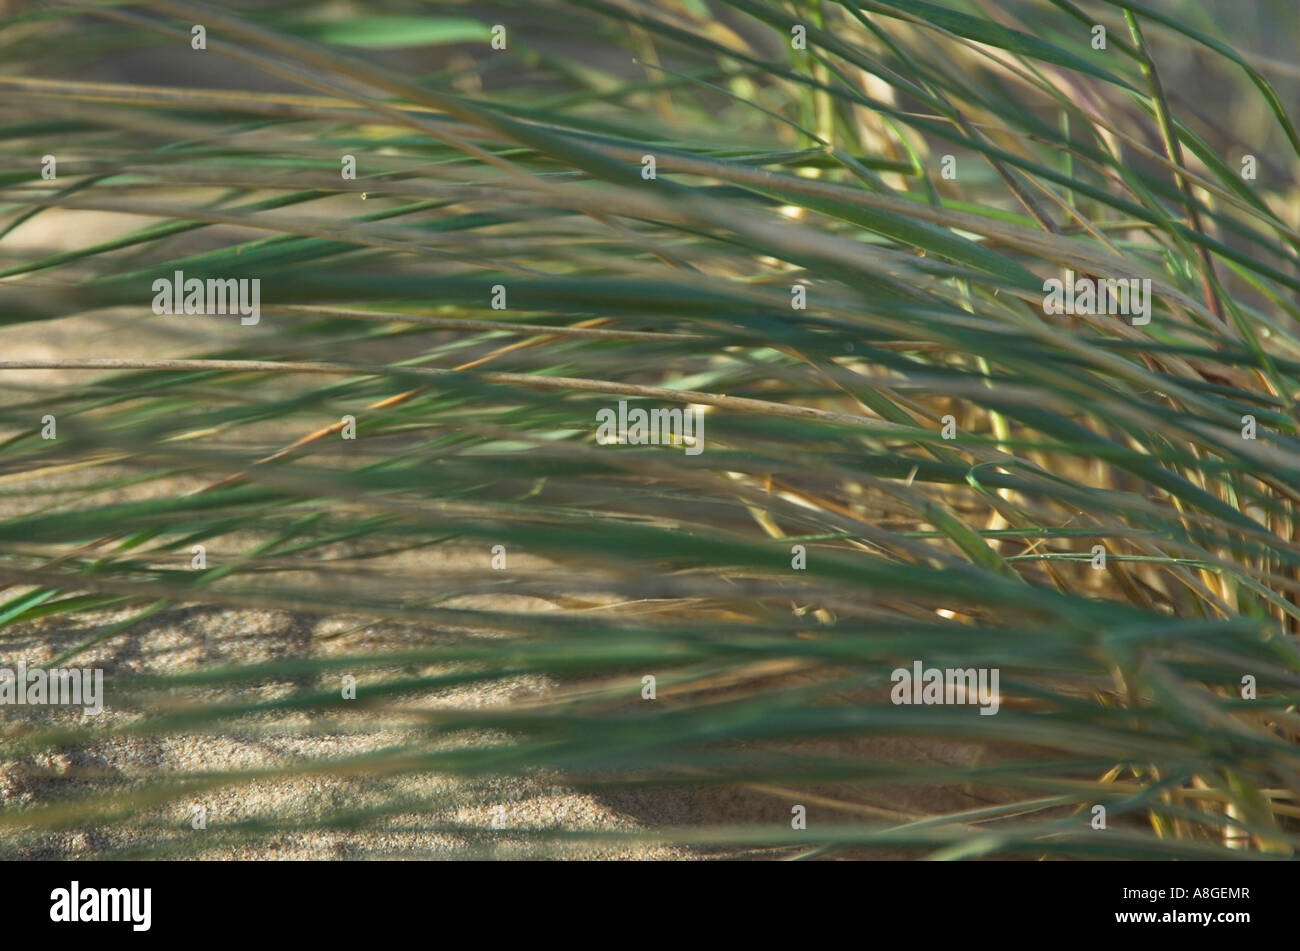 Marram grass (Ammophila arenaria) being blown in a strong wind Stock Photo